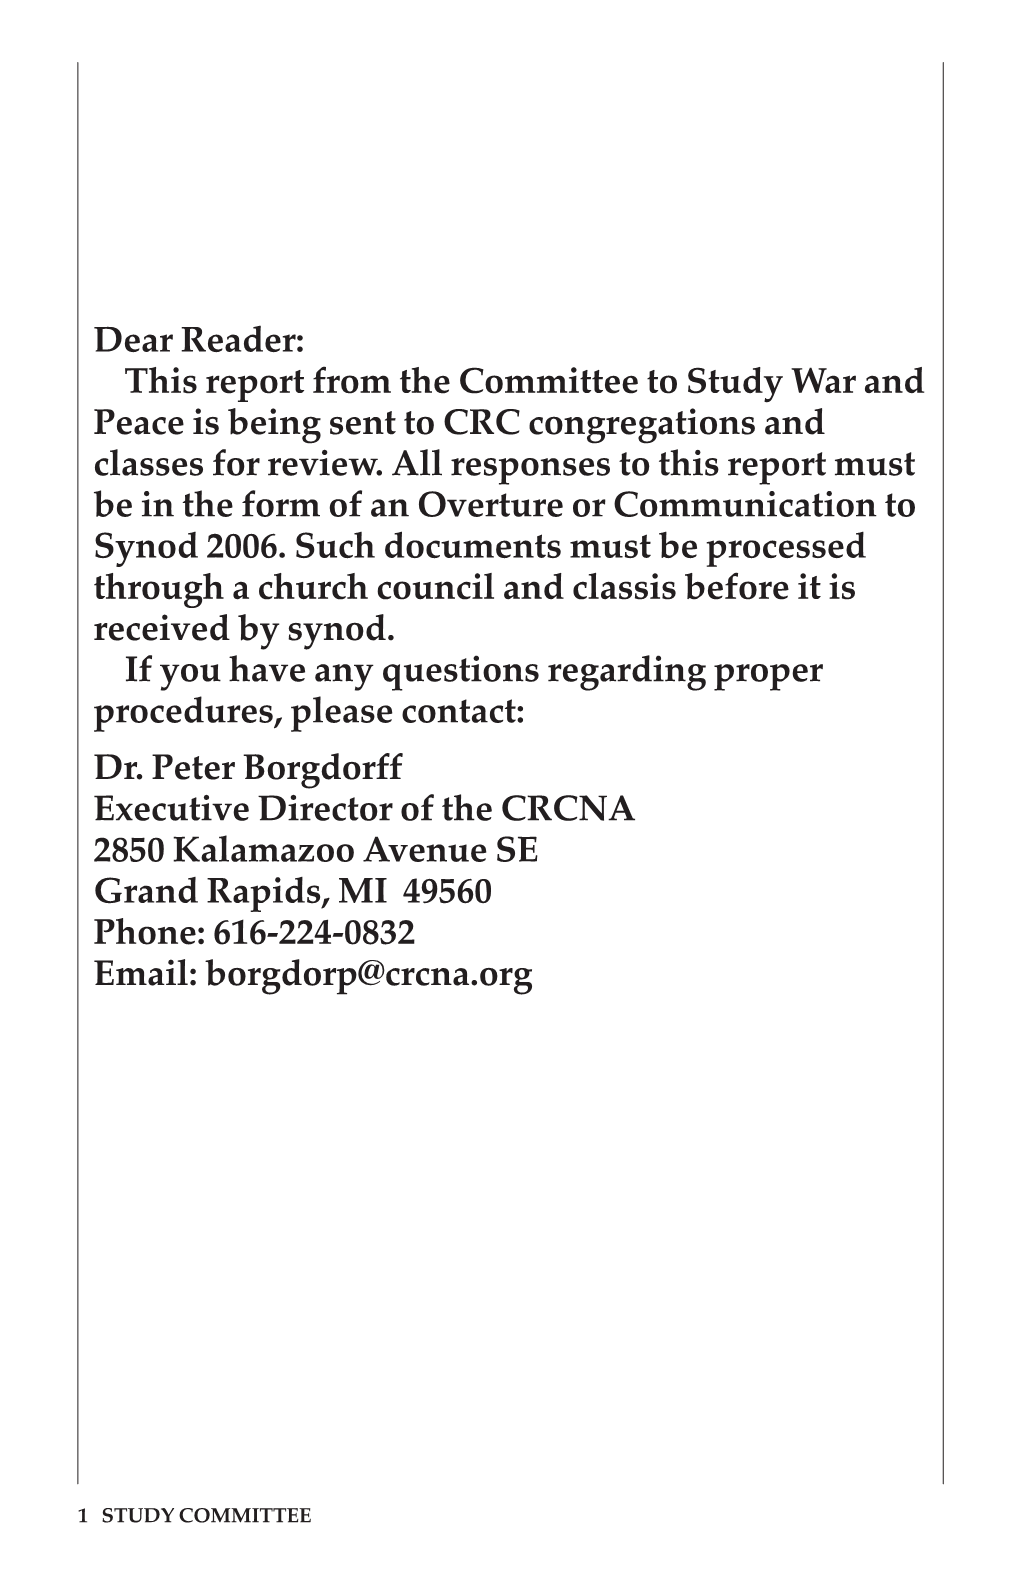 War and Peace Is Being Sent to CRC Congregations and Classes for Review